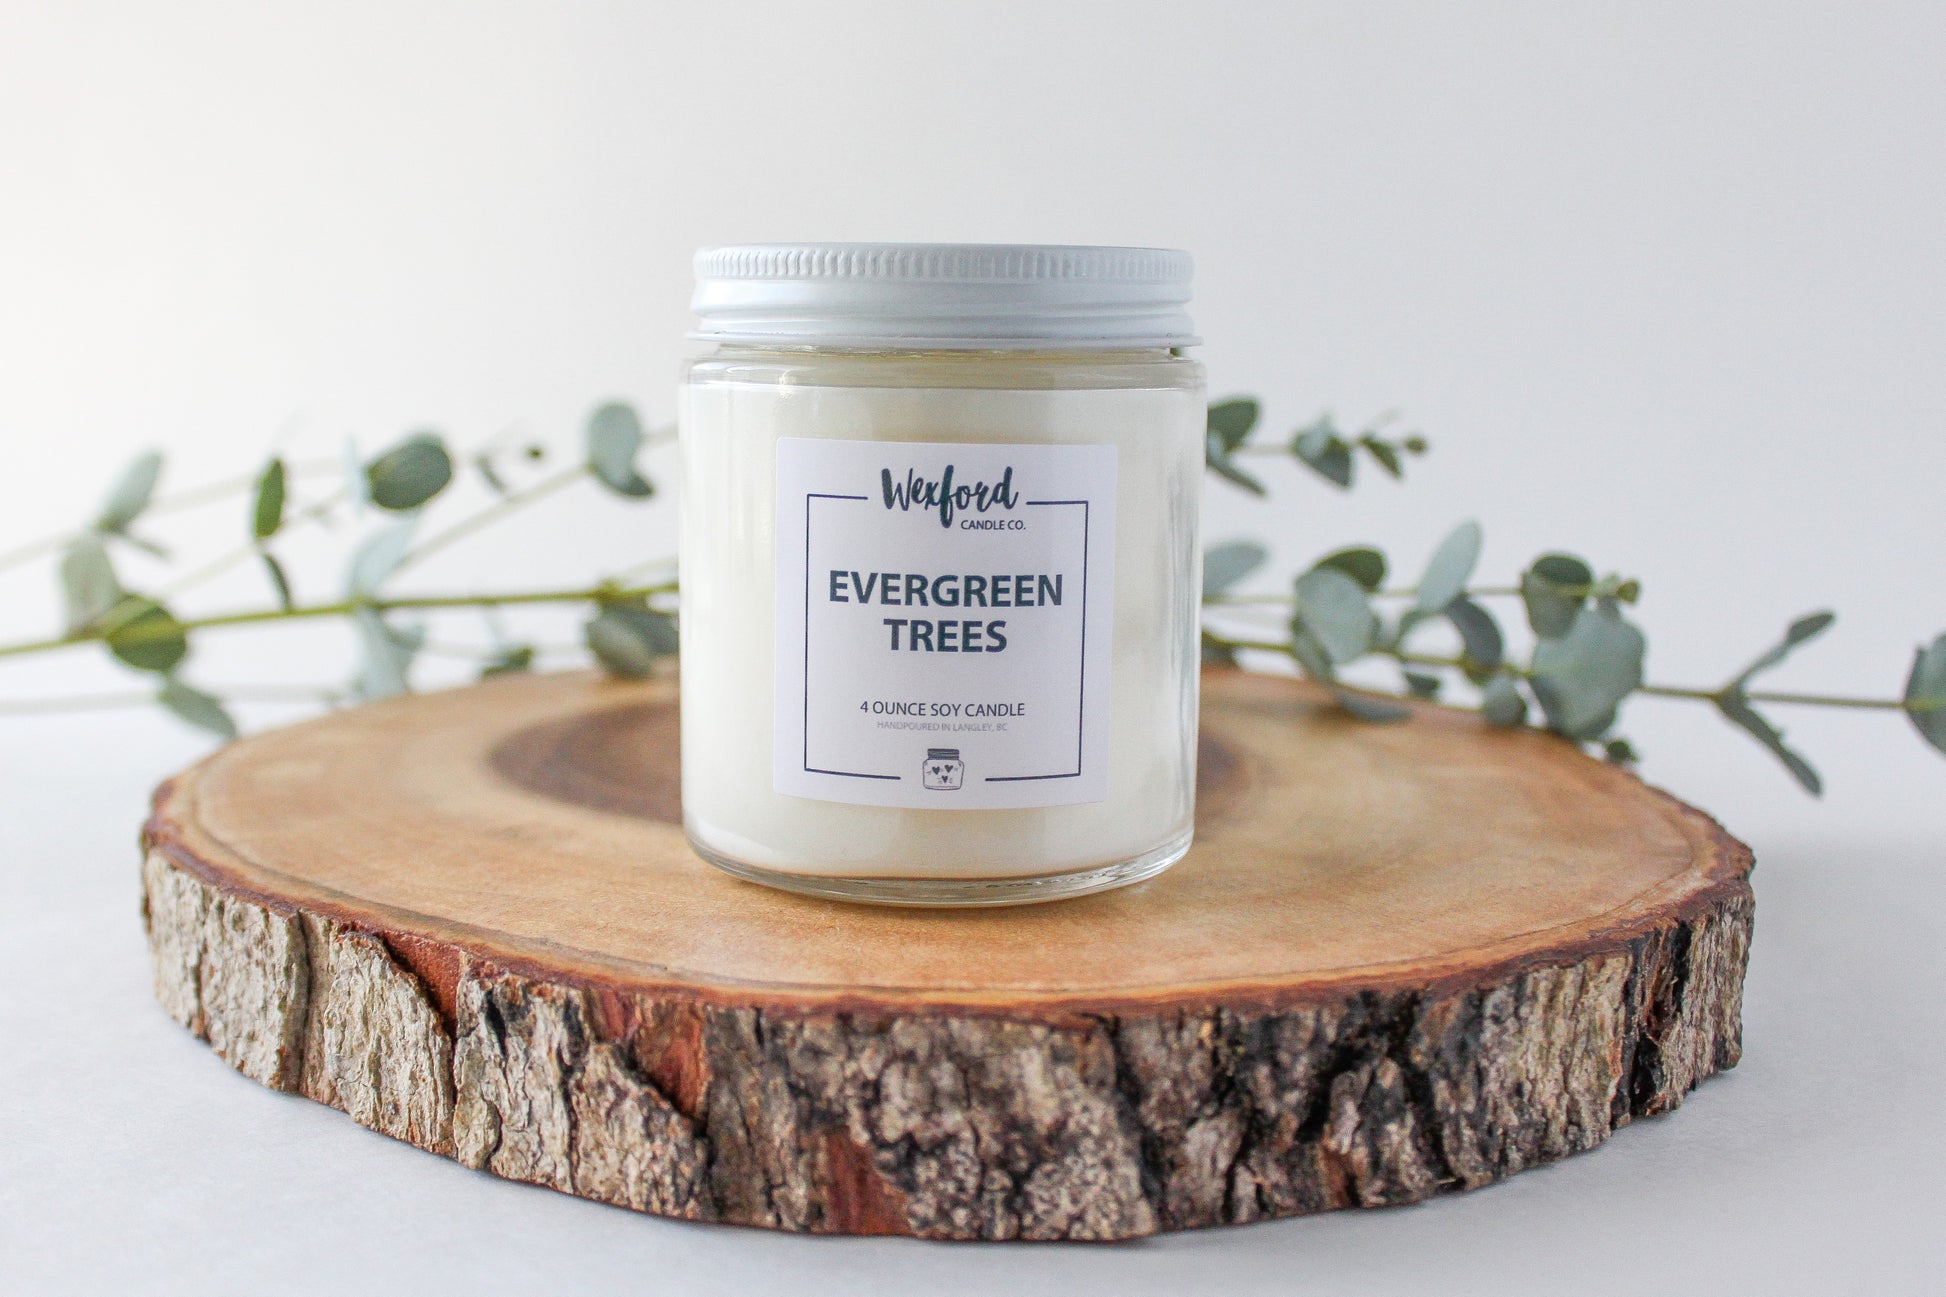 Evergreen Trees Soy Candle - Wexford Candle Co.